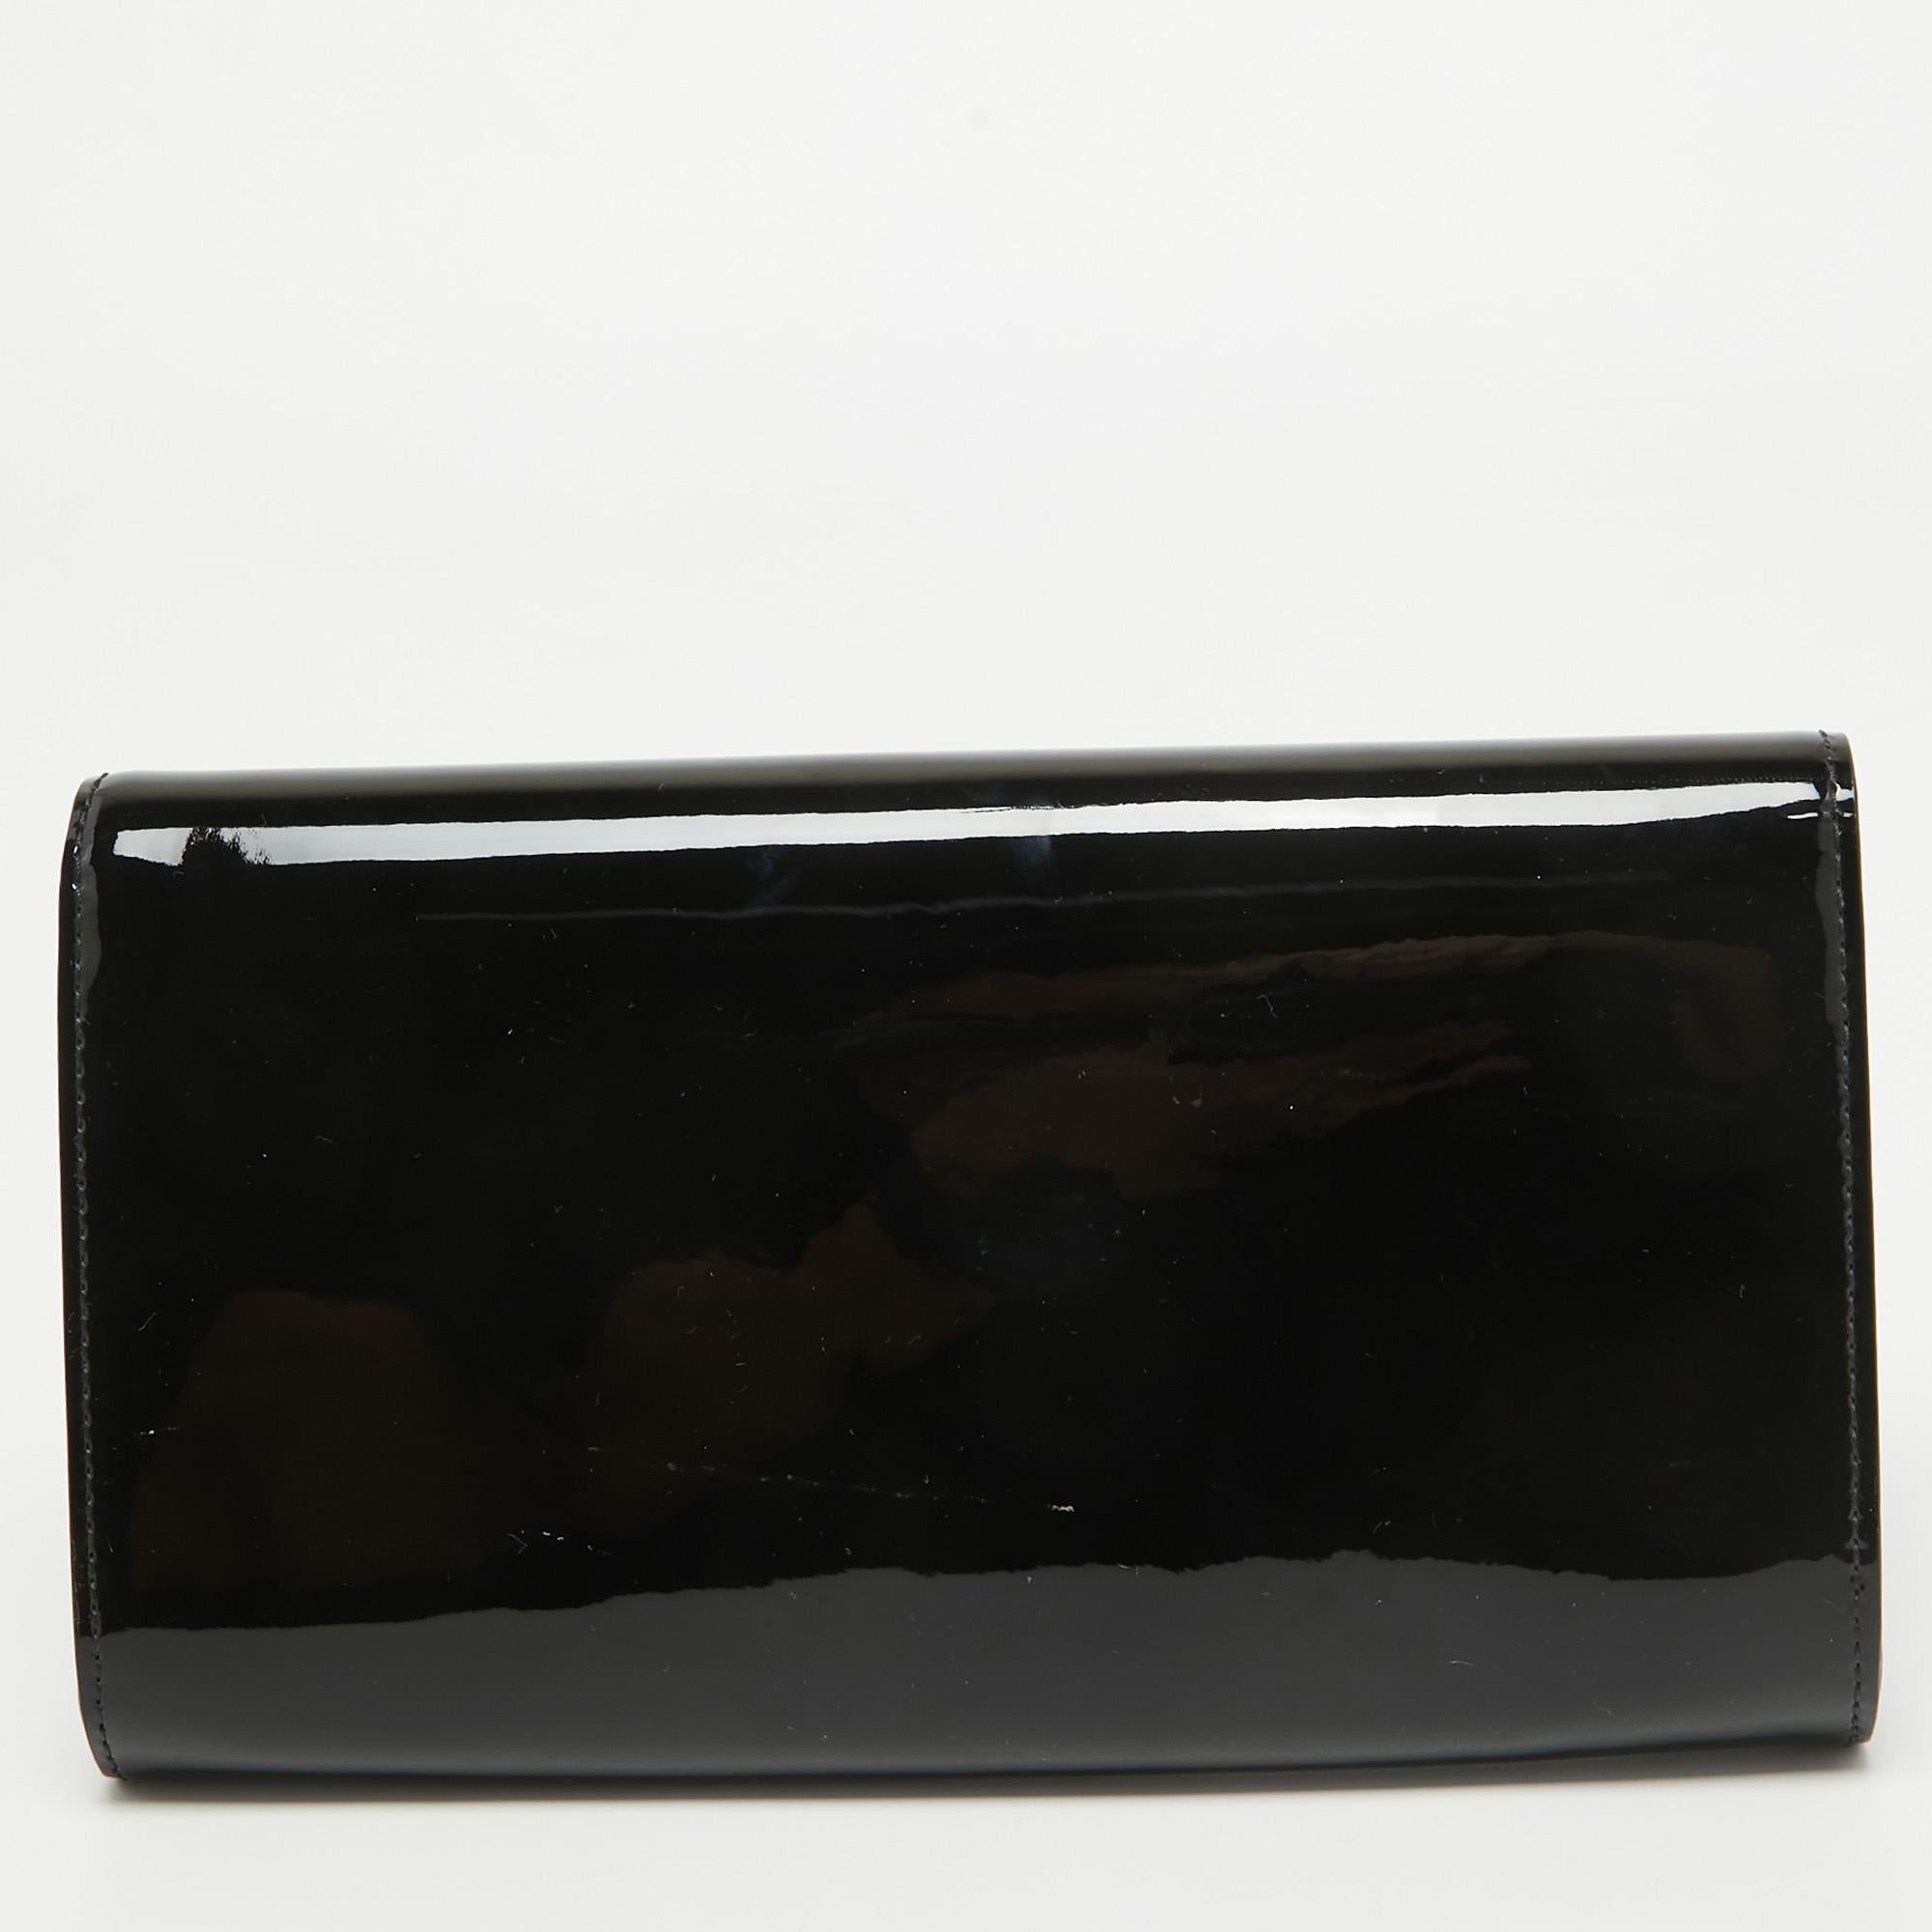 This Louise clutch by Louis Vuitton is glossy, well-crafted and overflowing with style. From the way it has been crafted to the way it has been designed, this clutch makes a loud fashion statement with every detail. It has a patent leather exterior,